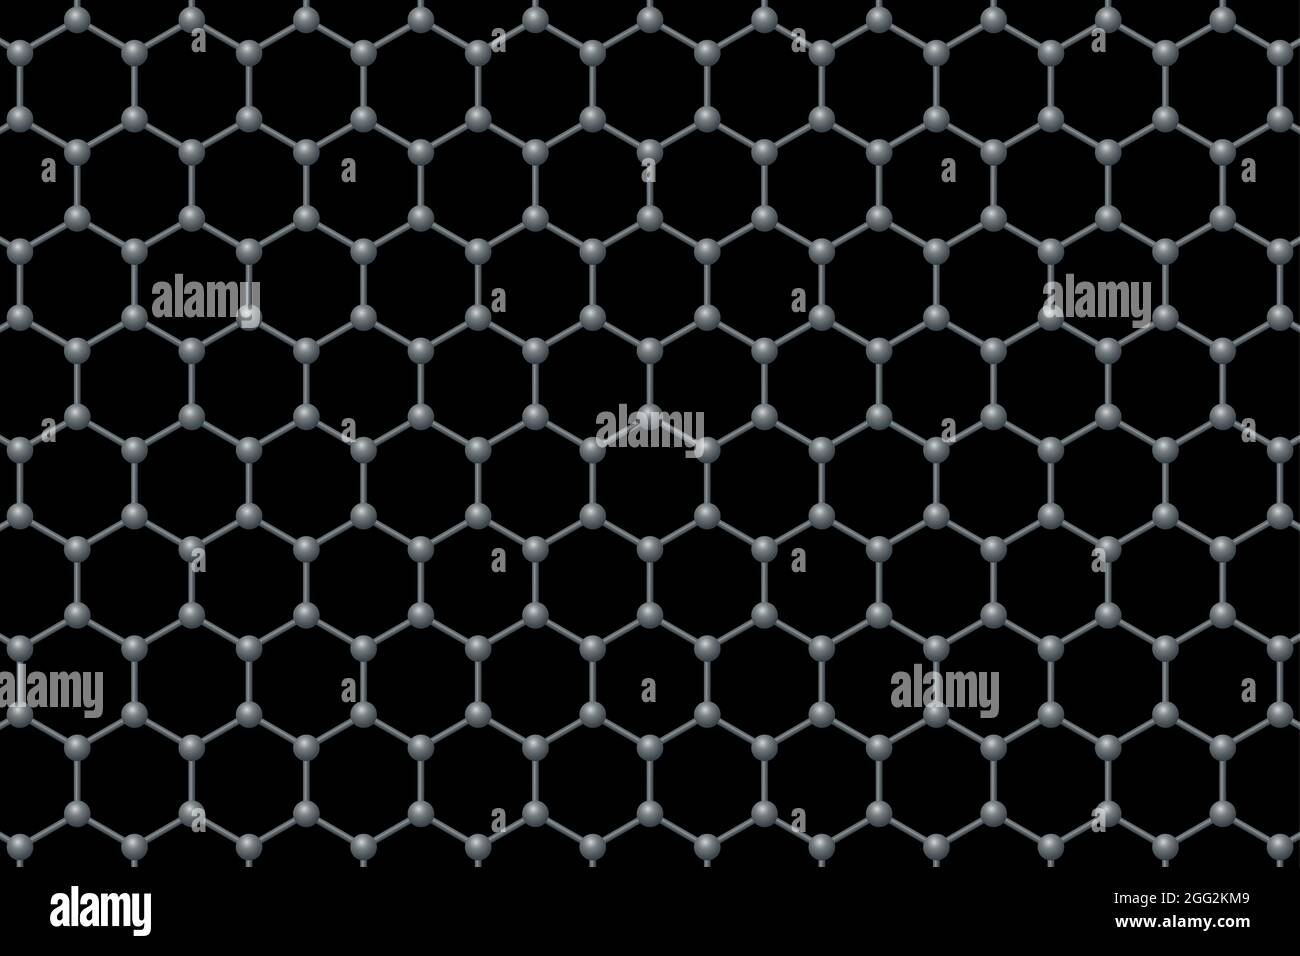 Graphene single layer background. Three-dimensional schematic molecular structure of graphene. Carbon atoms arranged in honeycomb lattice. Stock Photo